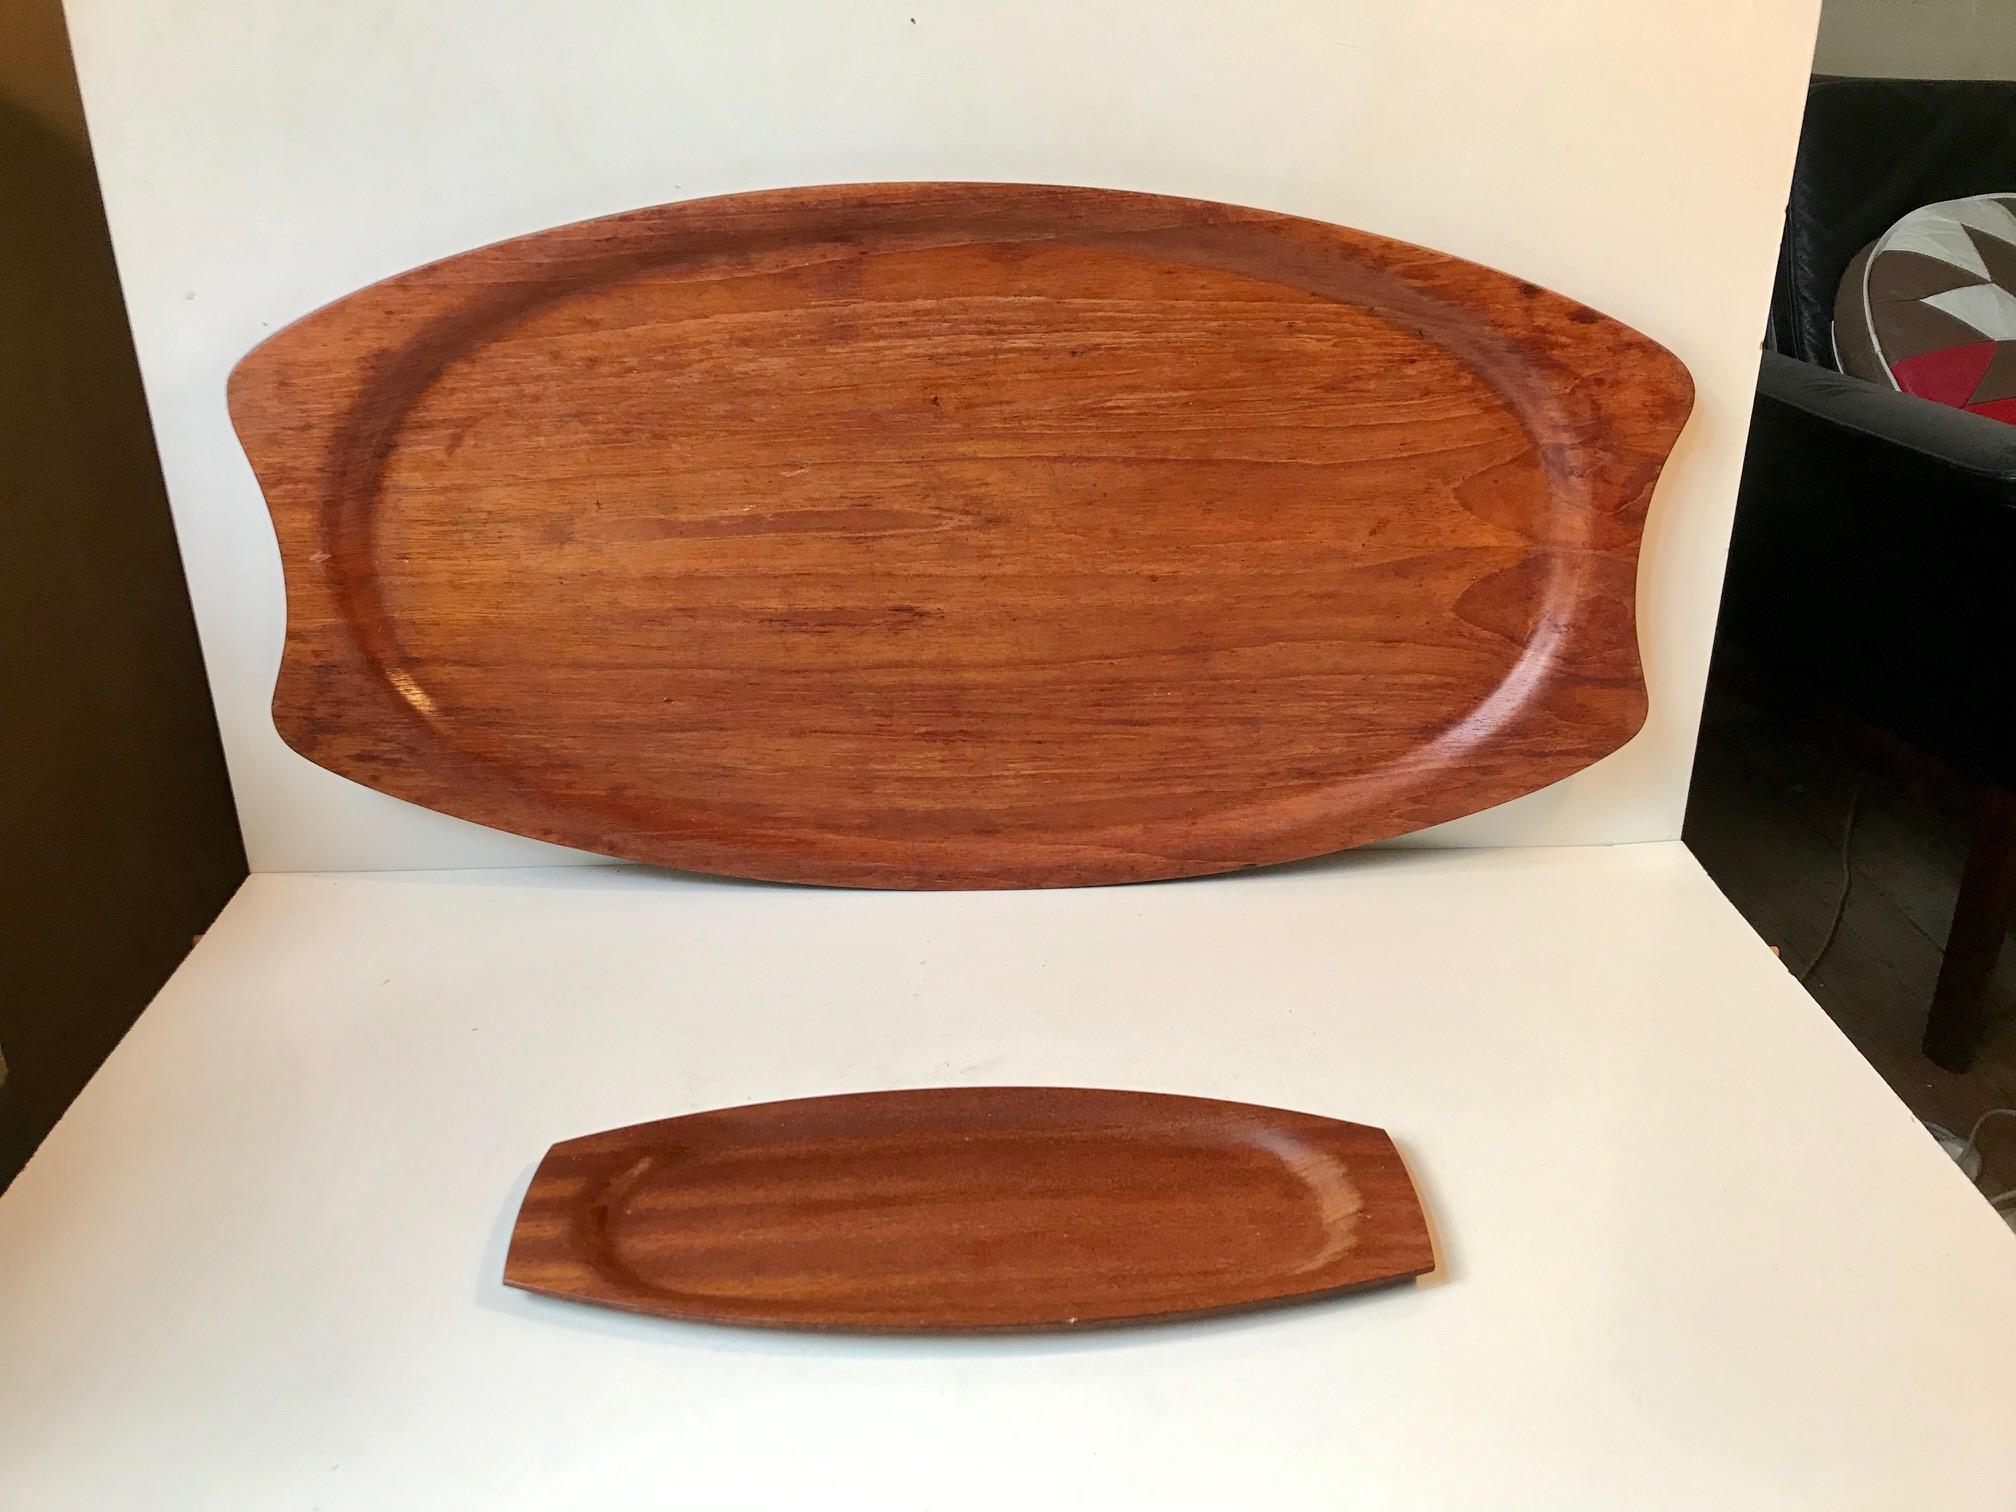 Large and small serving trays made from teak veneer. Suitable as a bed serving set due to its size and raised edges. It was made in Denmark during the 1960s by Silva. The small tray measures: 32 x 13 cm. The measurements below are for there large